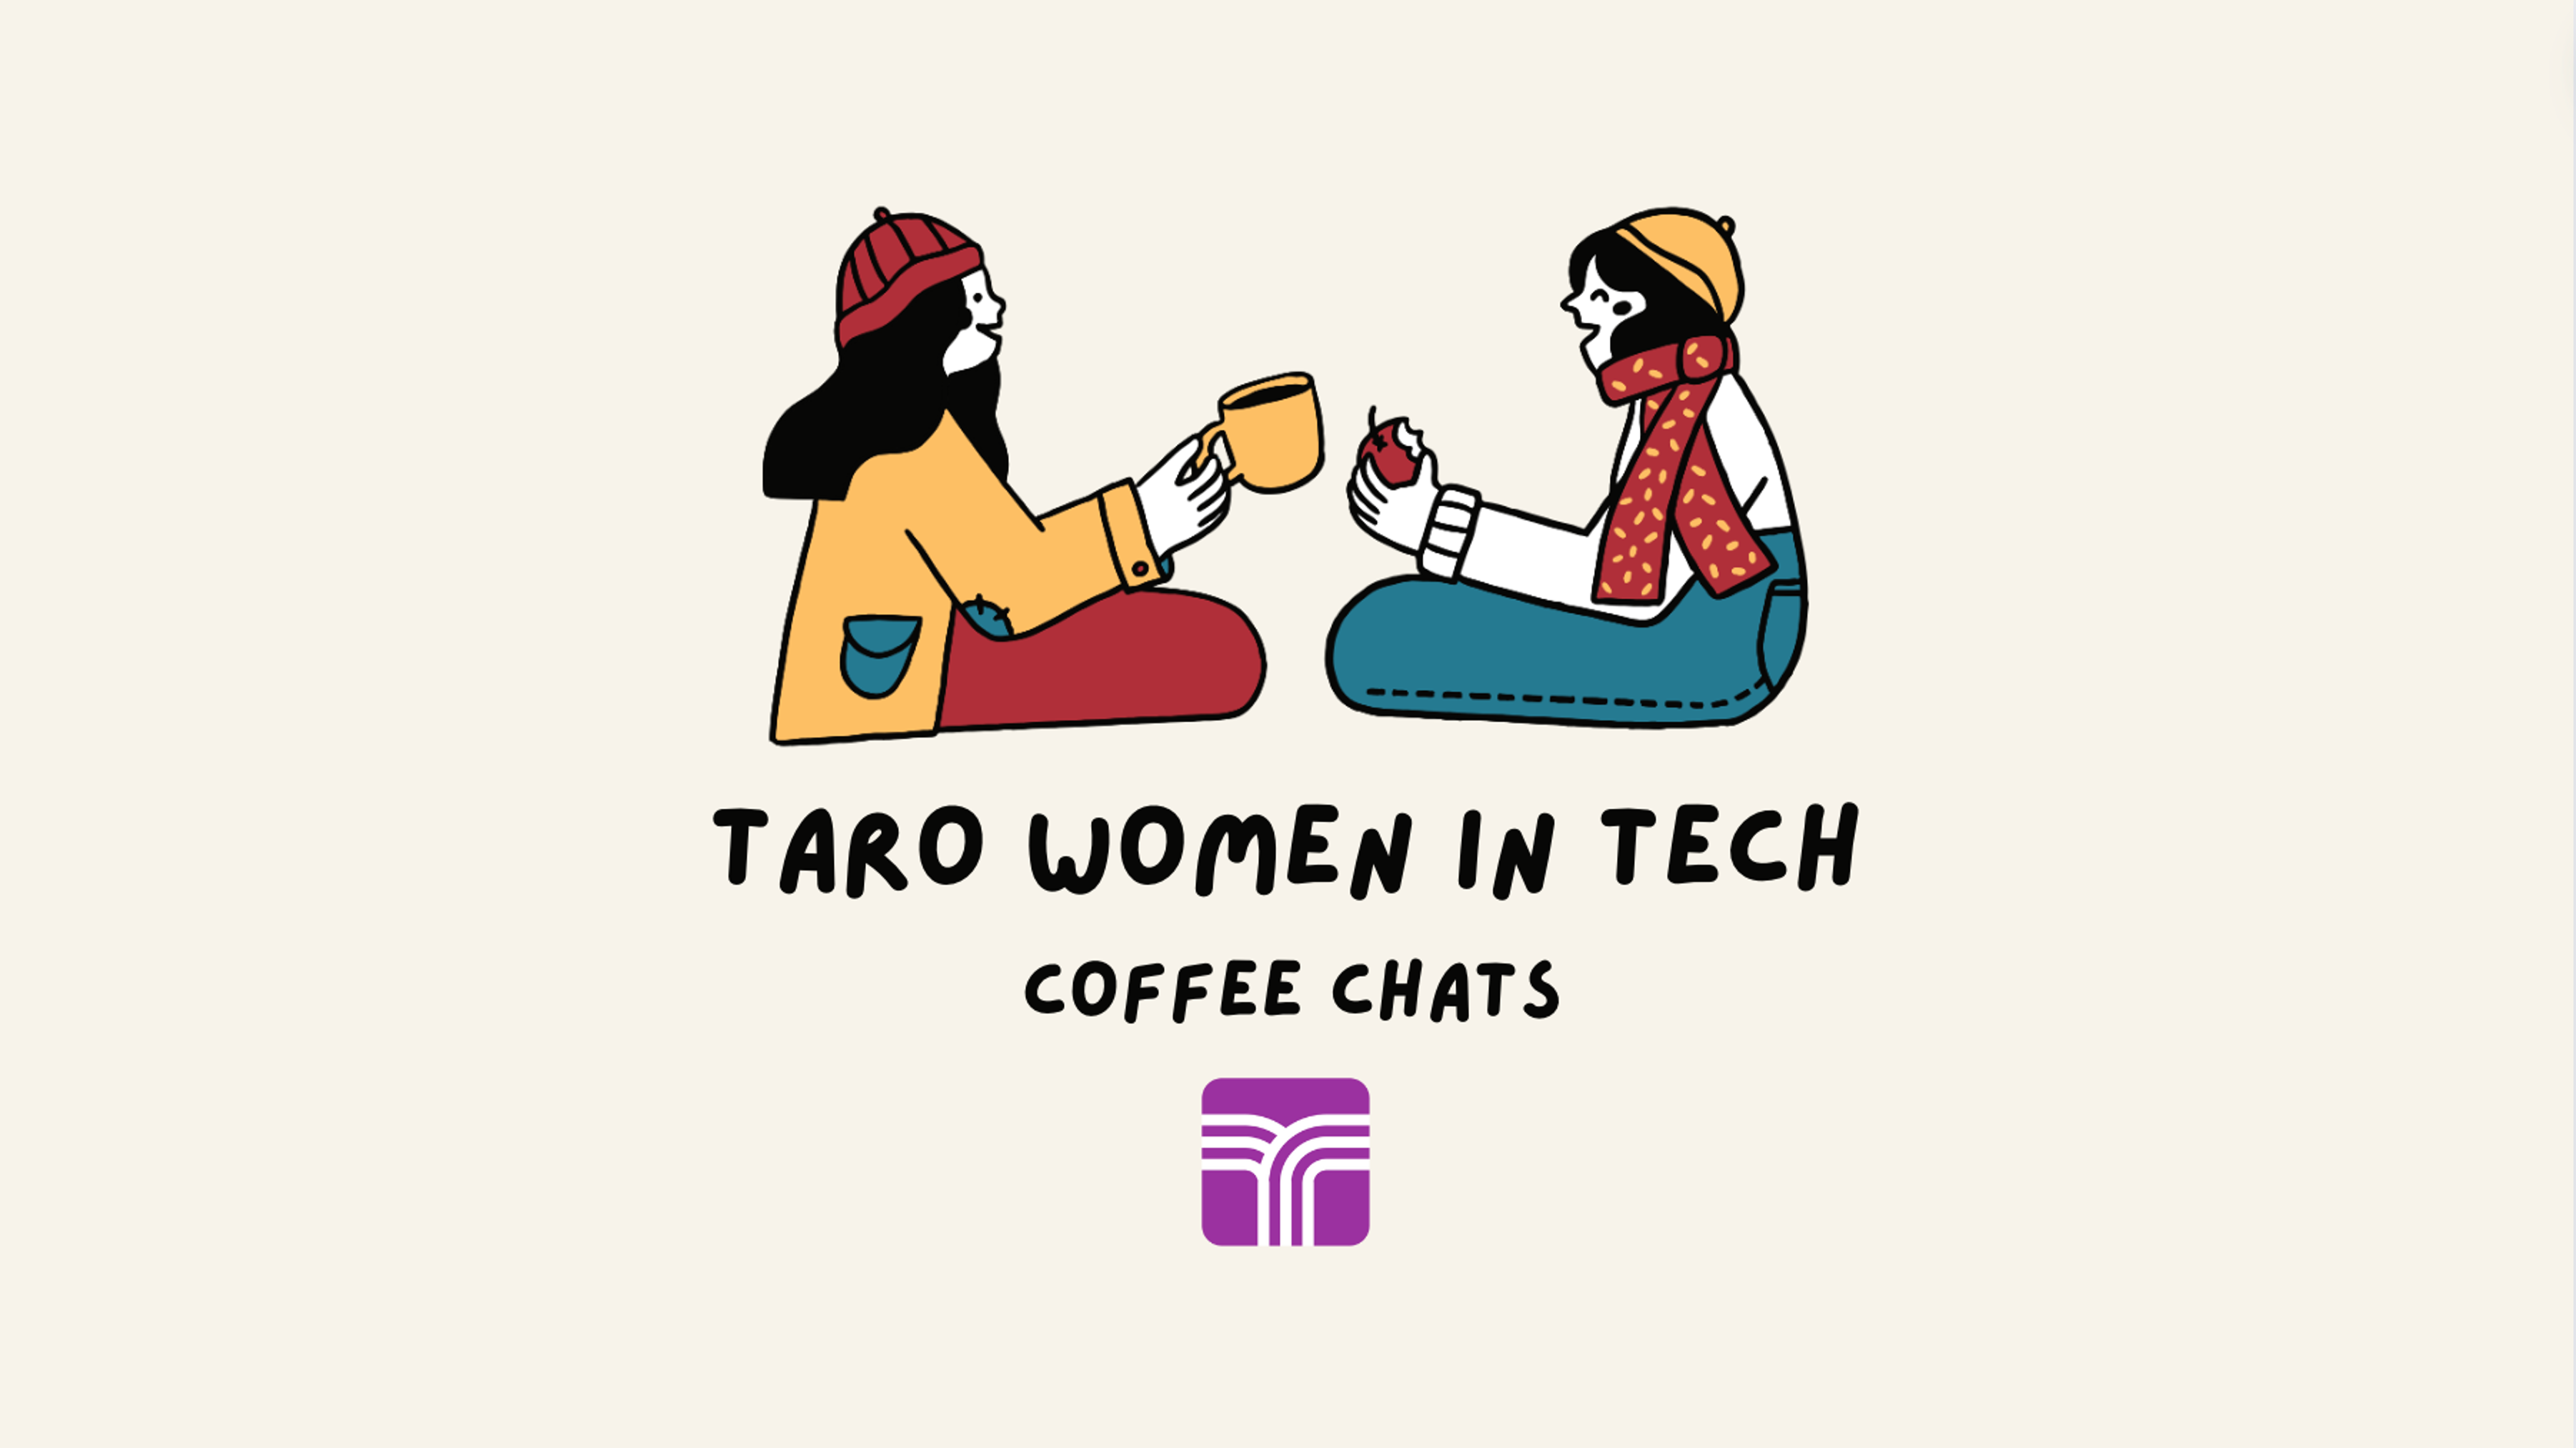 Taro Women in Tech Coffee Chat: "A Woman's Superpower in the Workplace" event